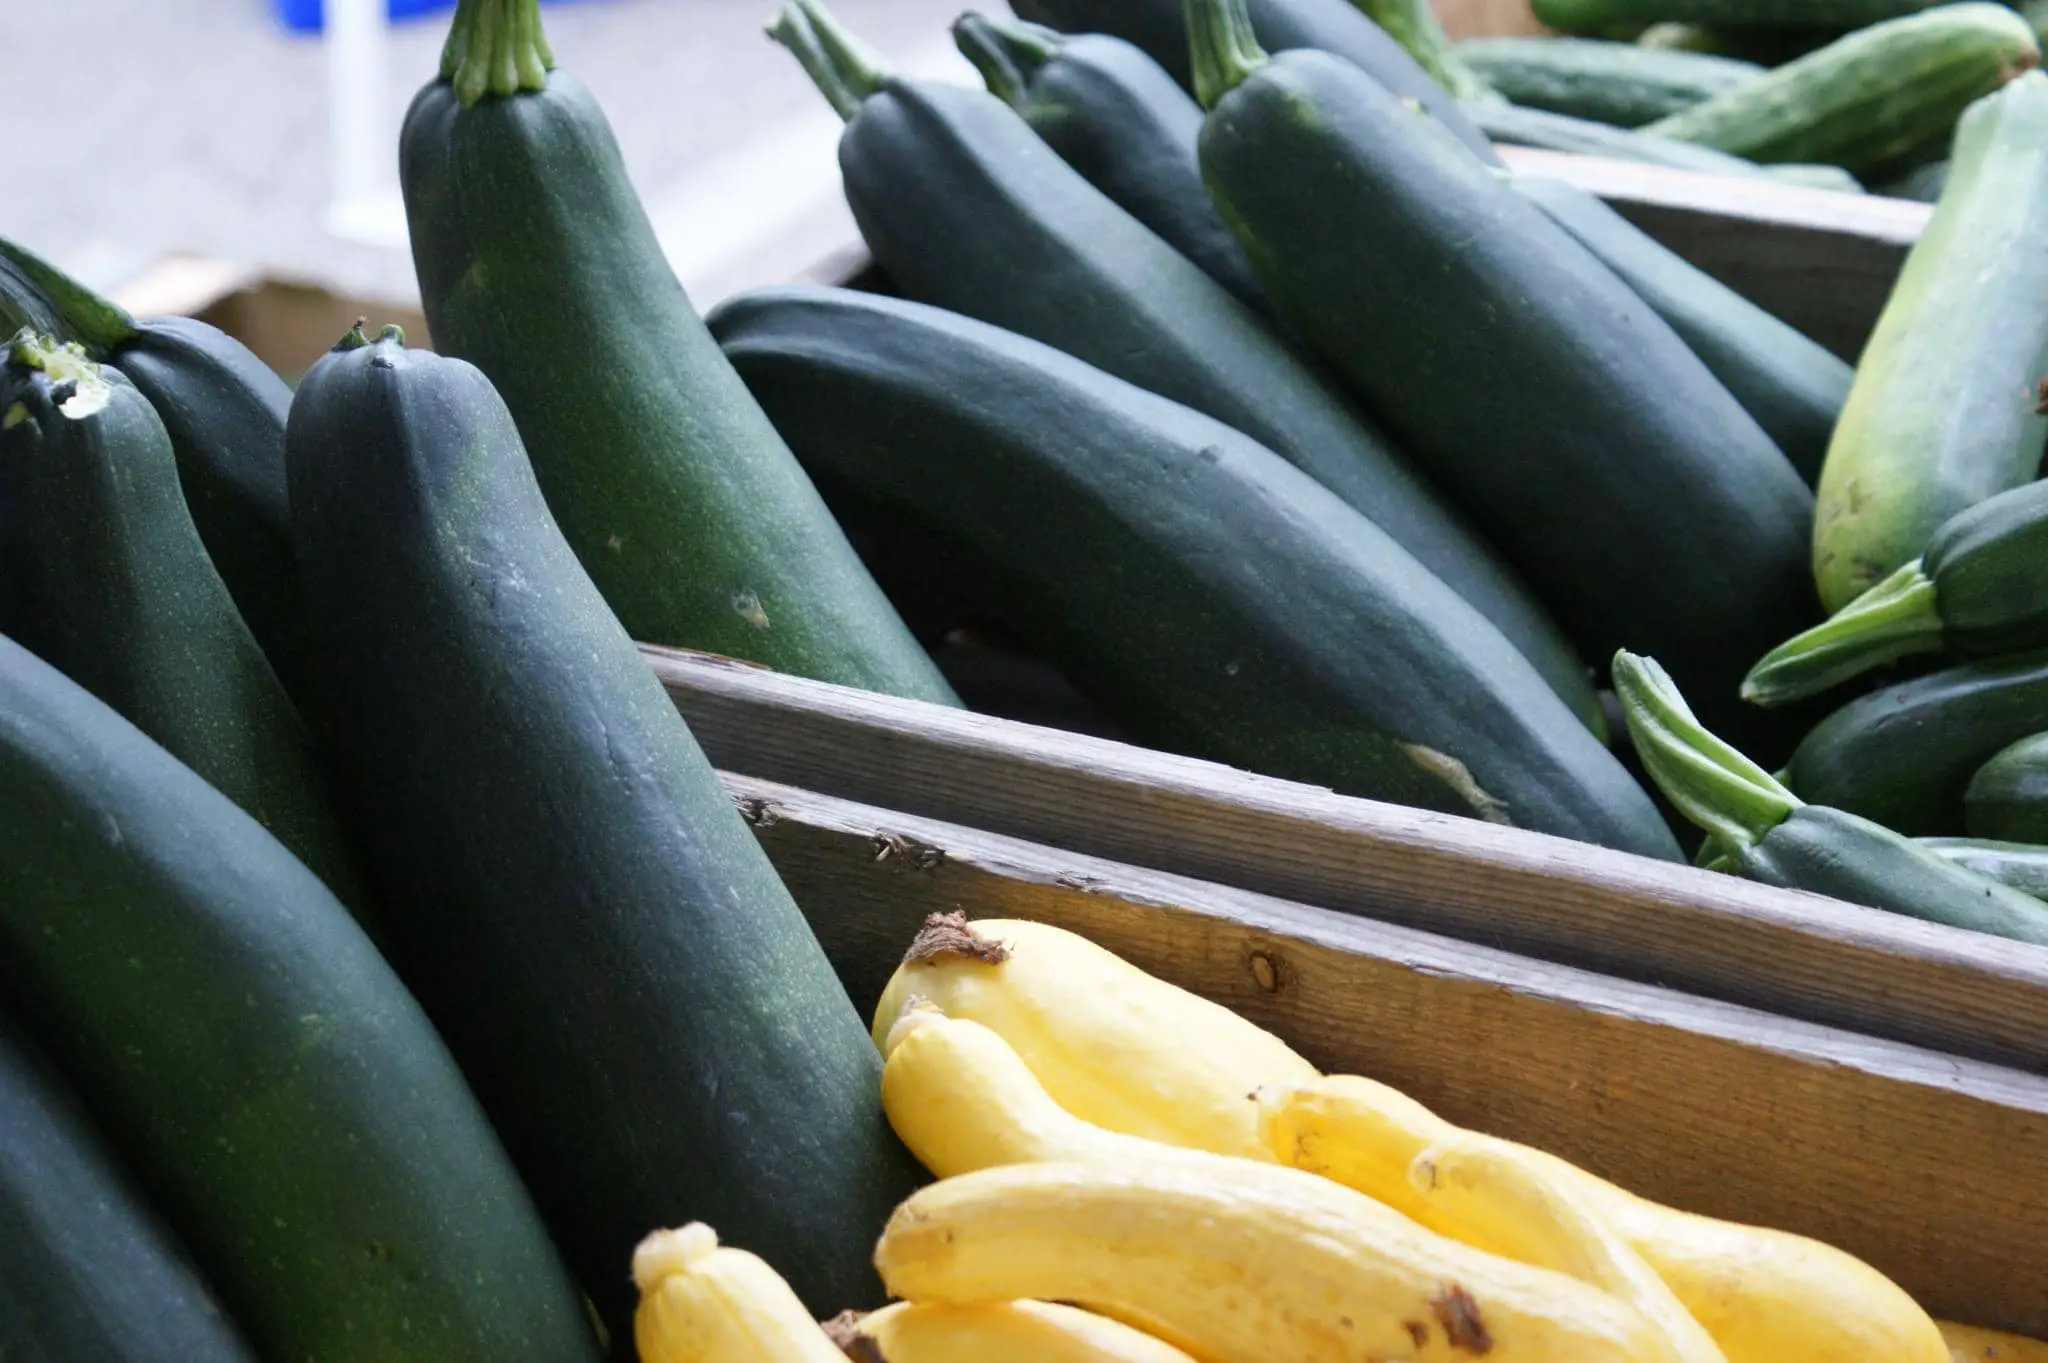 courgettes at the farmers market by gemmamei